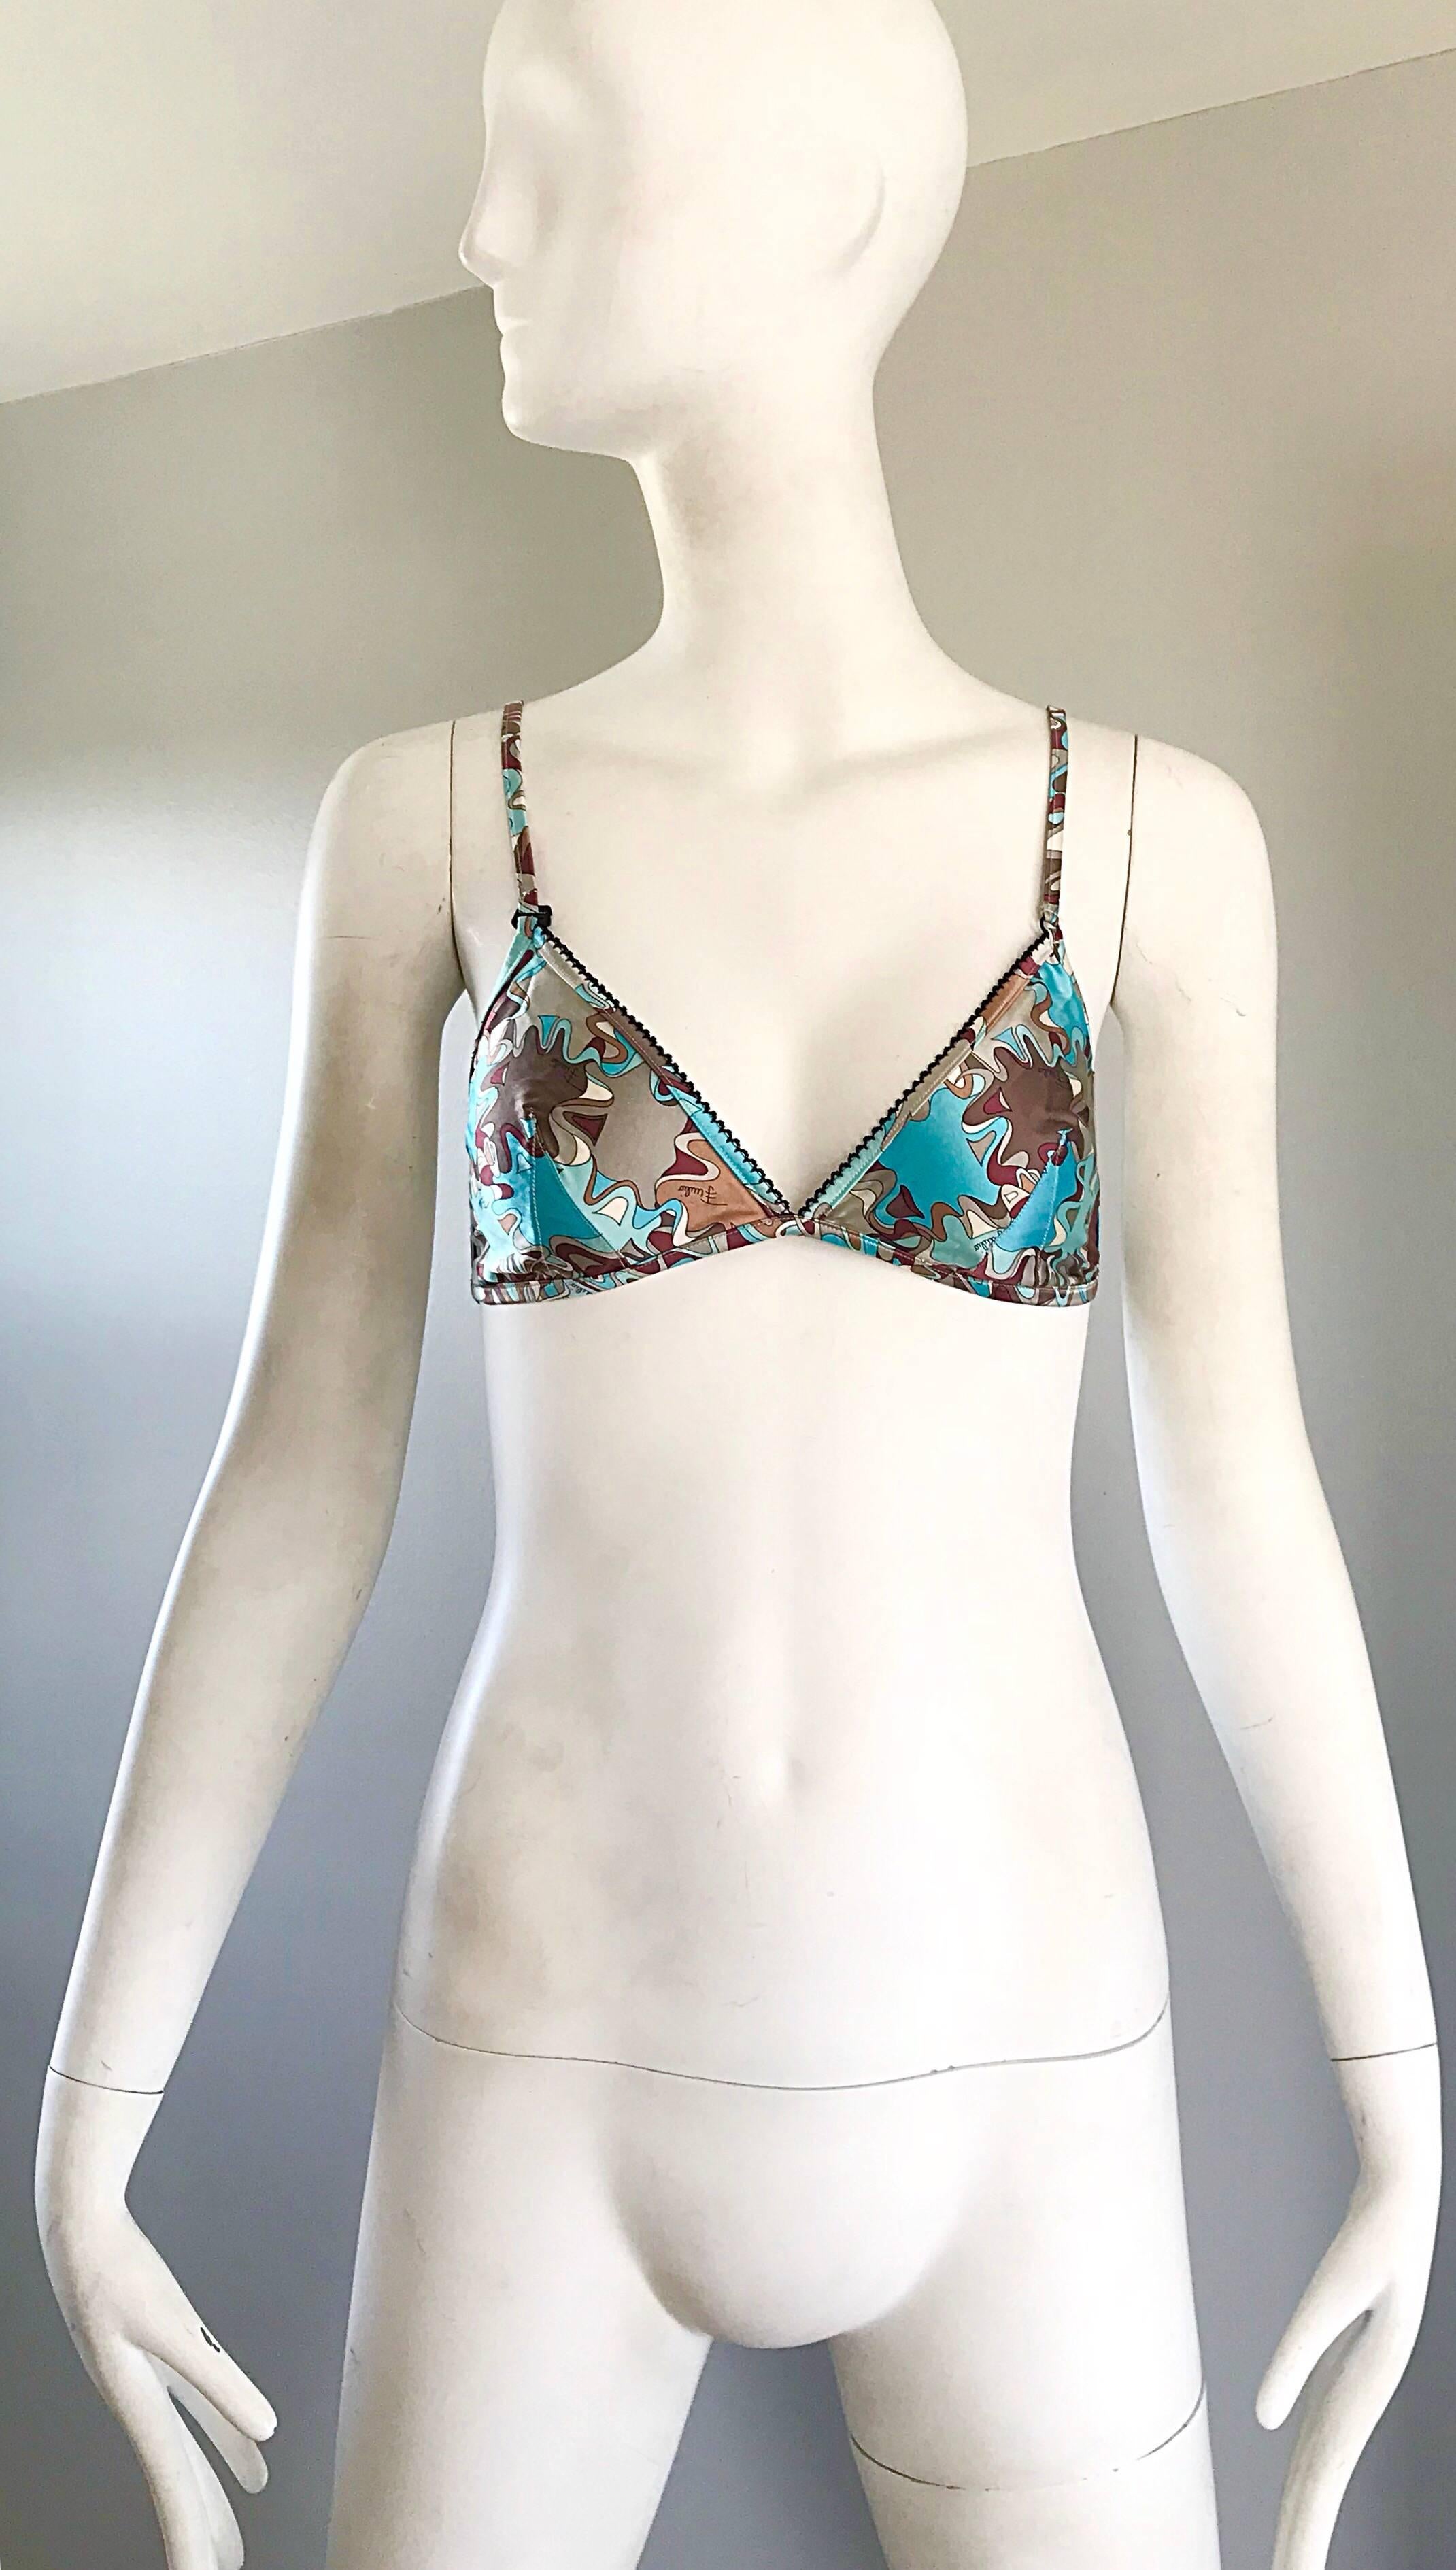 Sexy brand new 90s vintage EMILIO PUCCI silk bra crop top! Features the signature Pucci kaleidoscope print, with Pucci signature scribbled throughout. Straps are adjustable, and can be worn classic, or racerback style. Could also easily be used as a